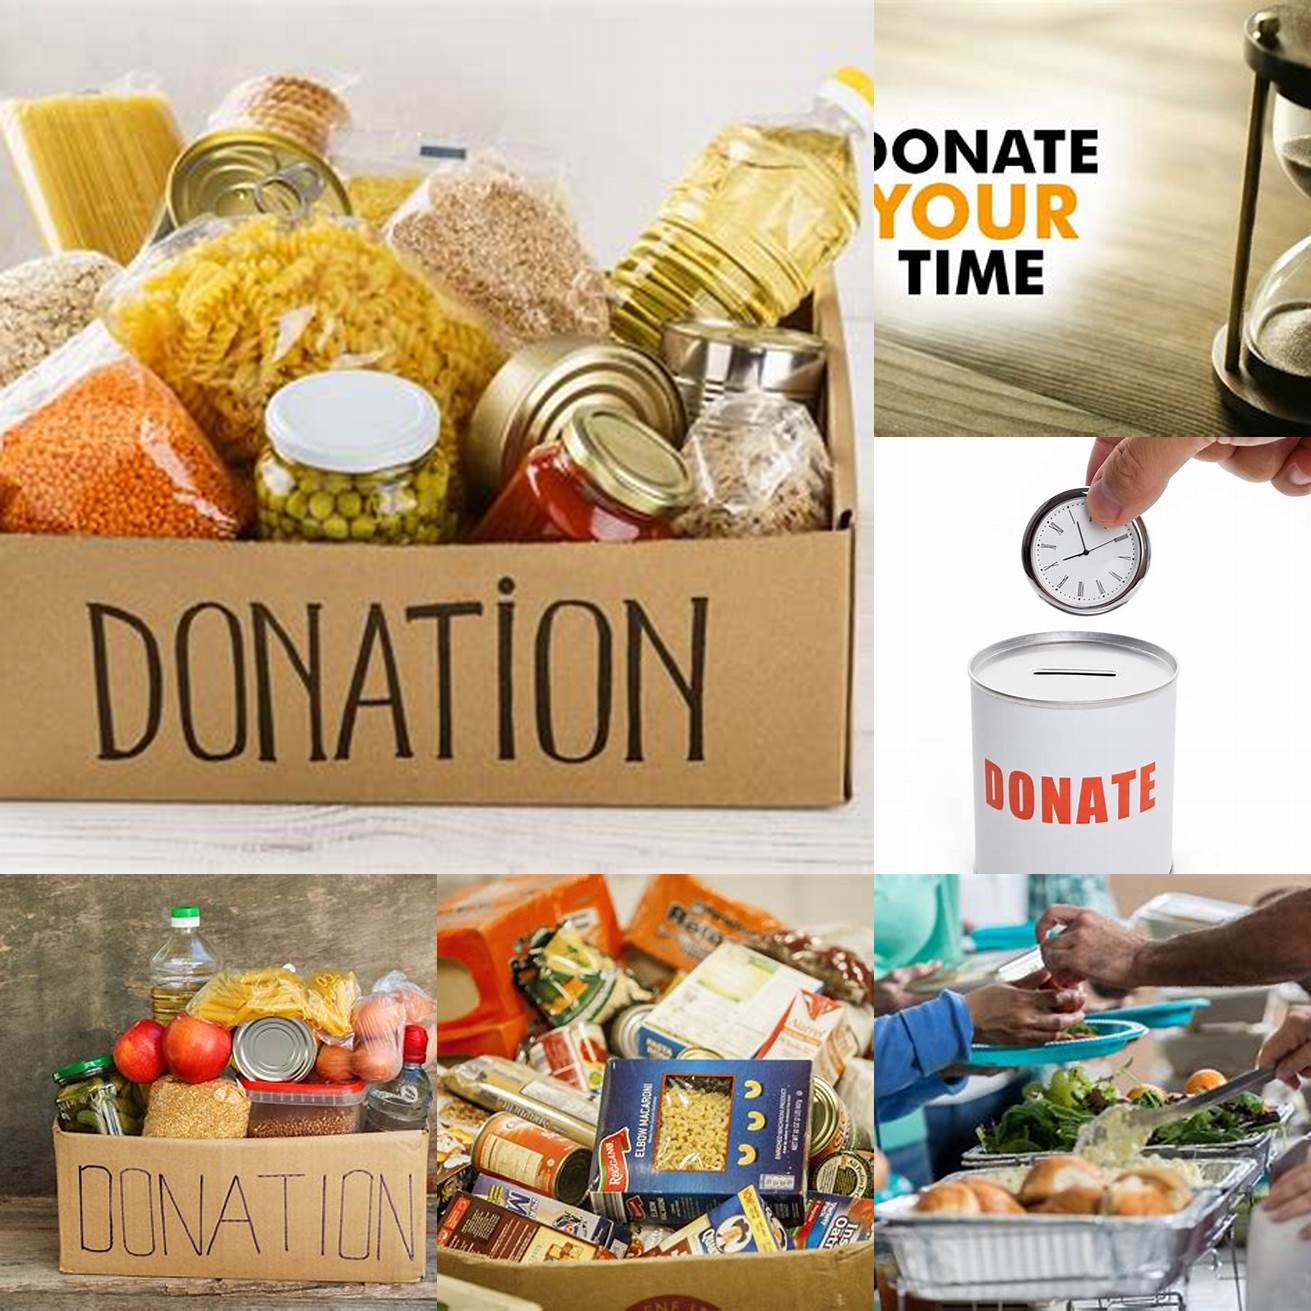 Donate time You can also donate your time by organizing a food drive fundraising event or awareness campaign for the soup kitchen